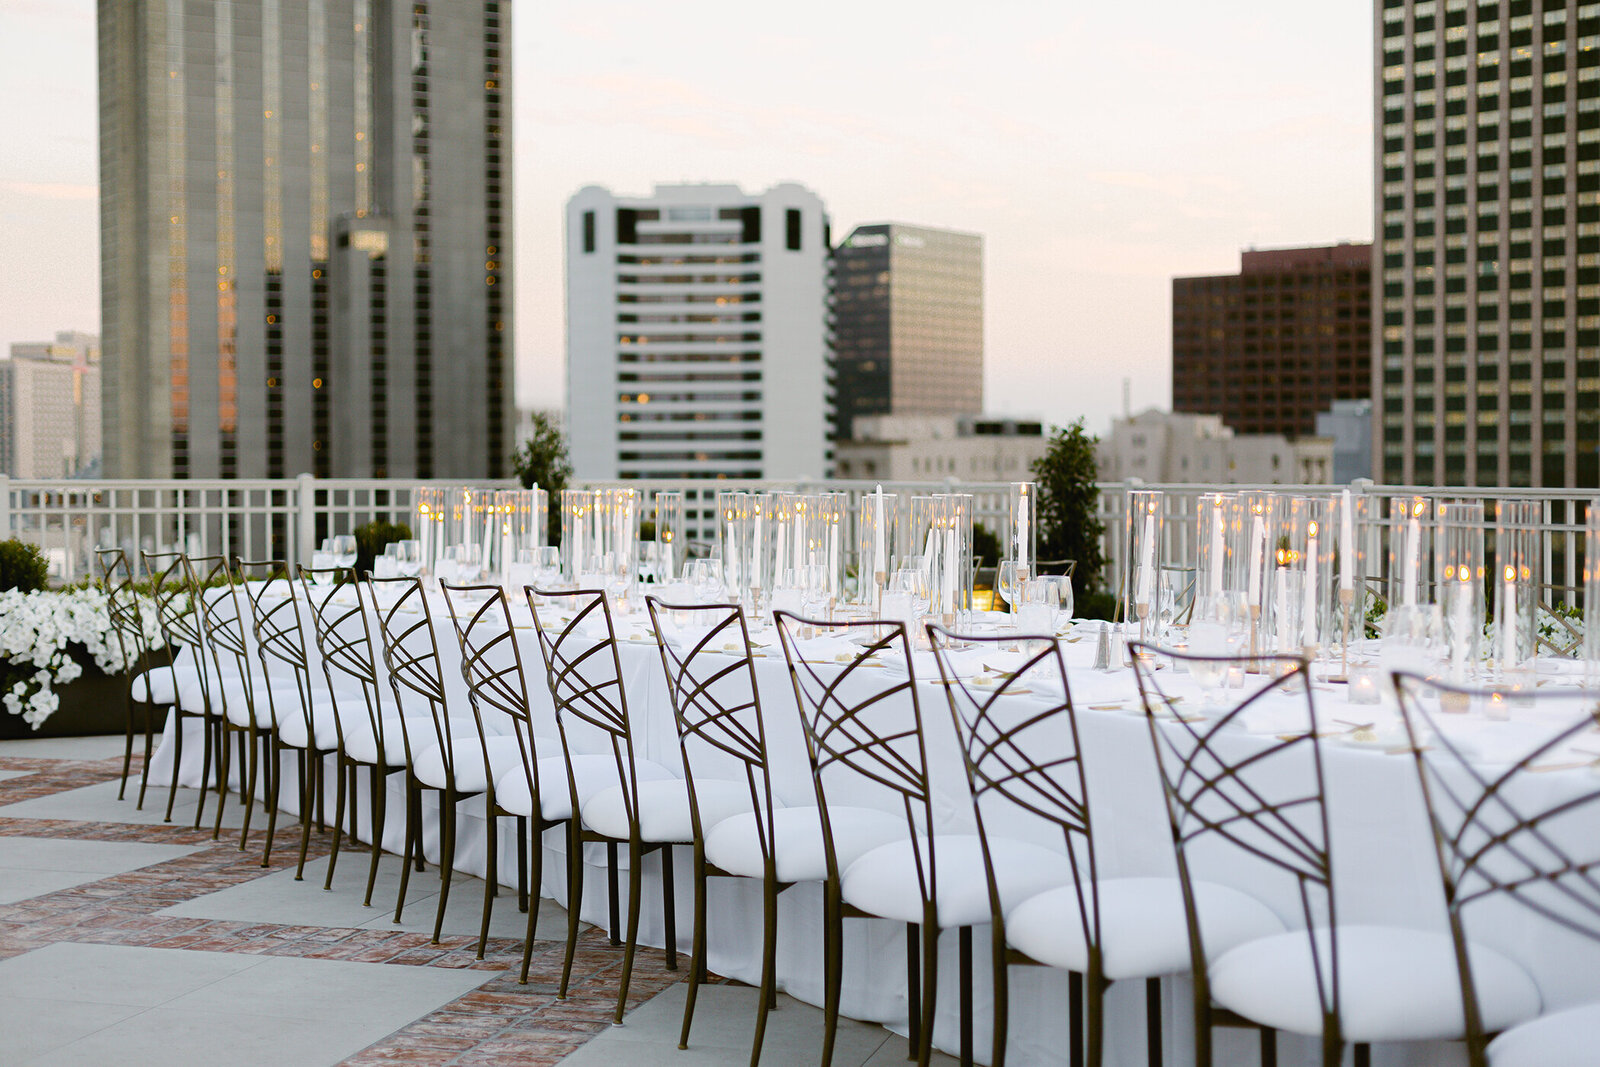 Faye + Mark - Rehearsal Dinner at the Ritz Carlton New Orleans - Luxury Wedding Planner - Michelle Norwood Events14